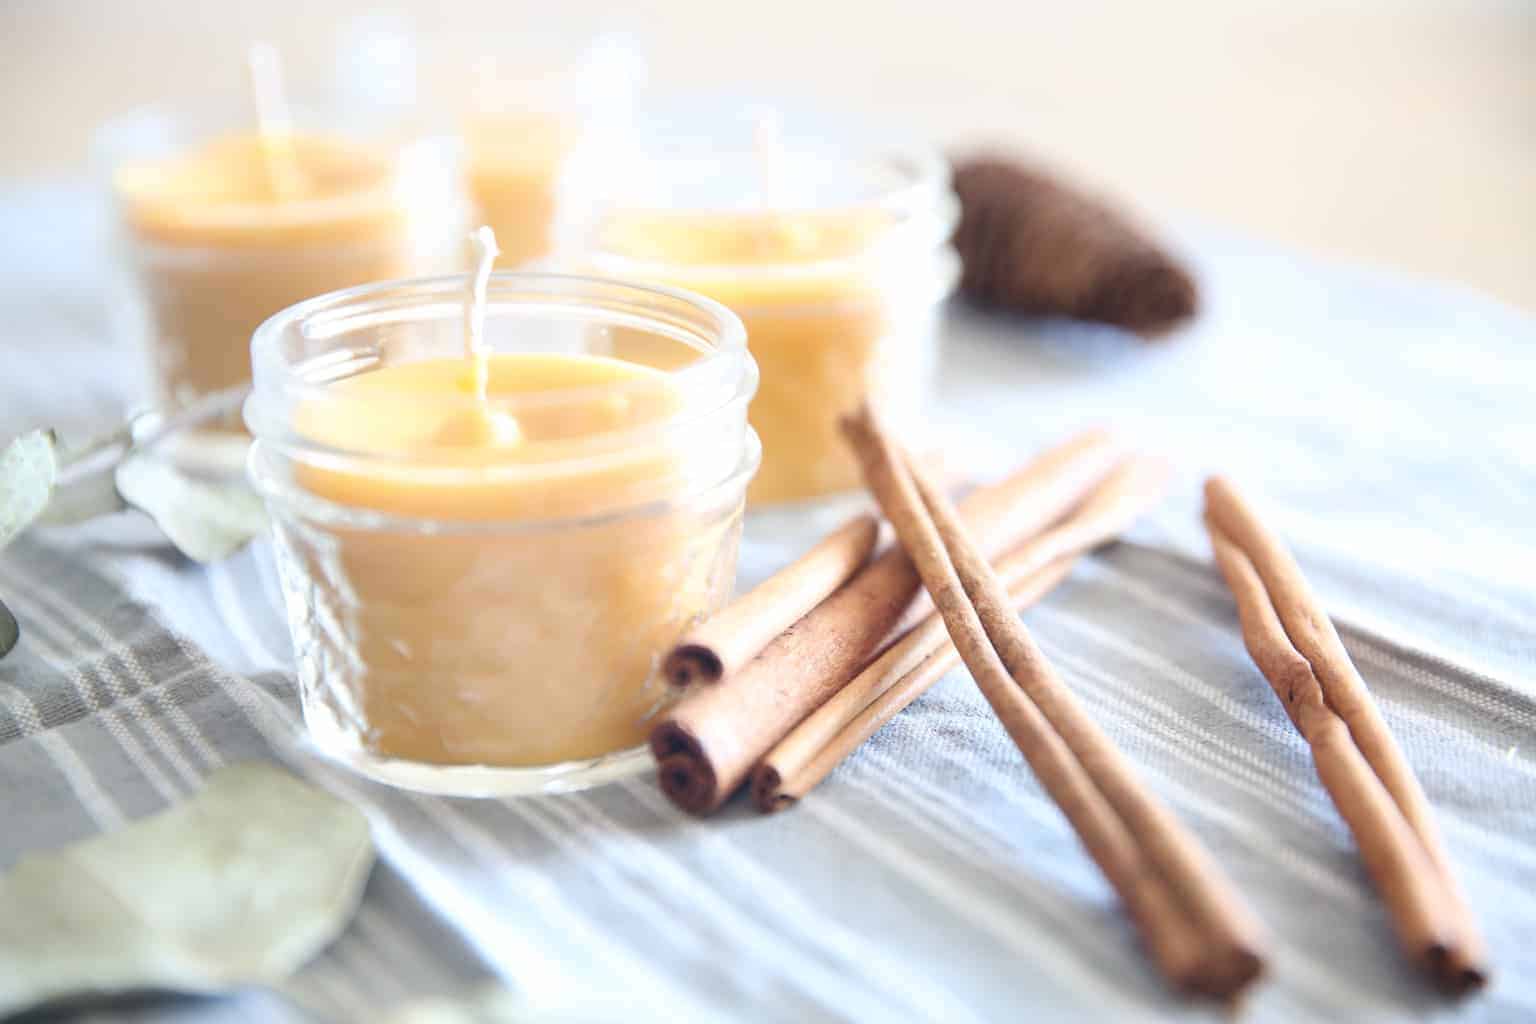 Step by step process of making homemade beeswax candles